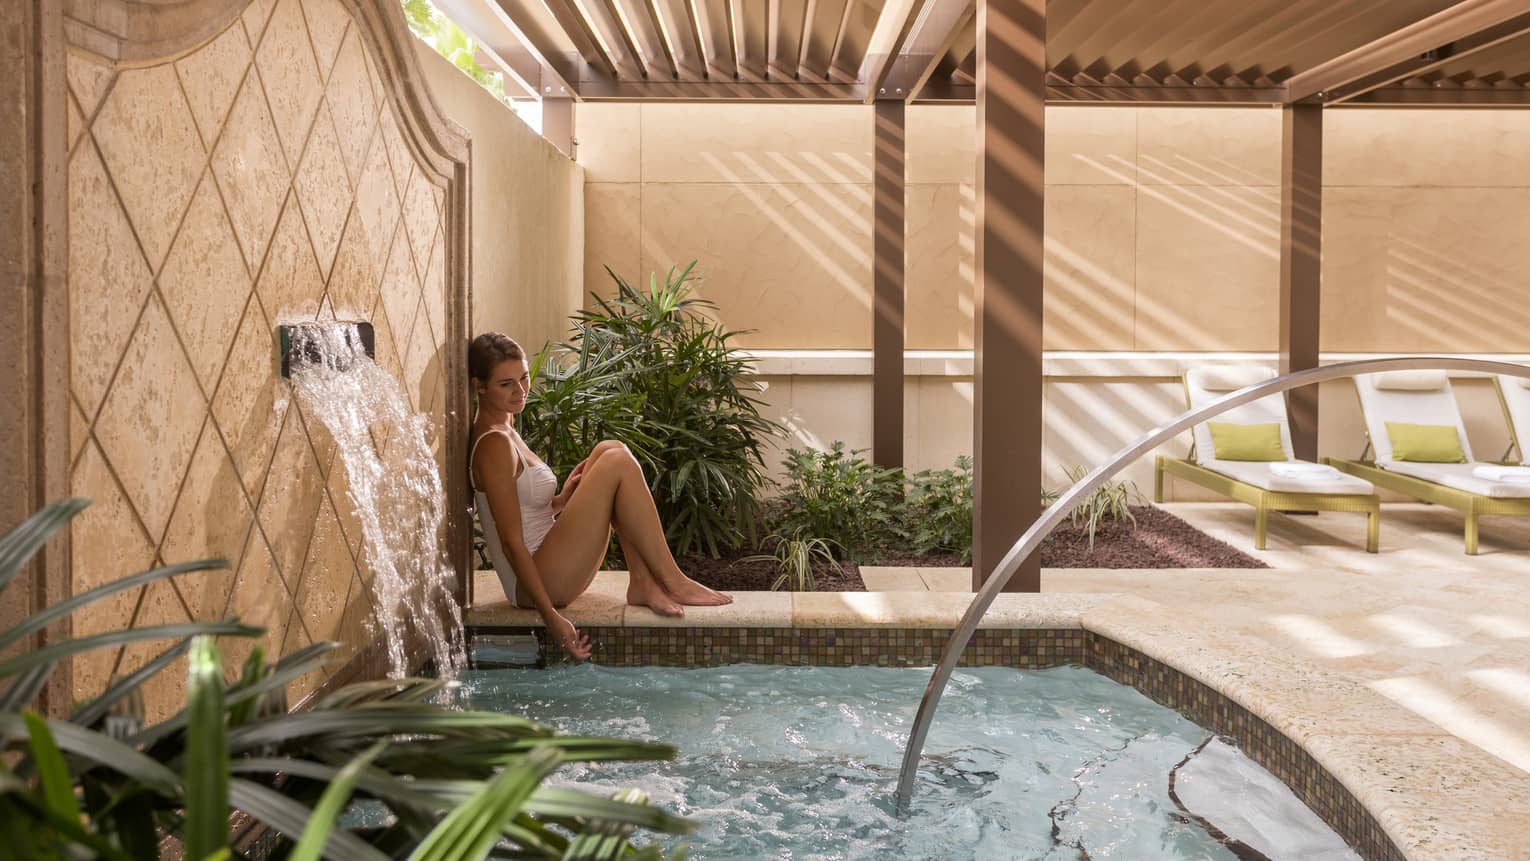 Woman wearing swimsuit leans against tile wall with fountain by small spa pool